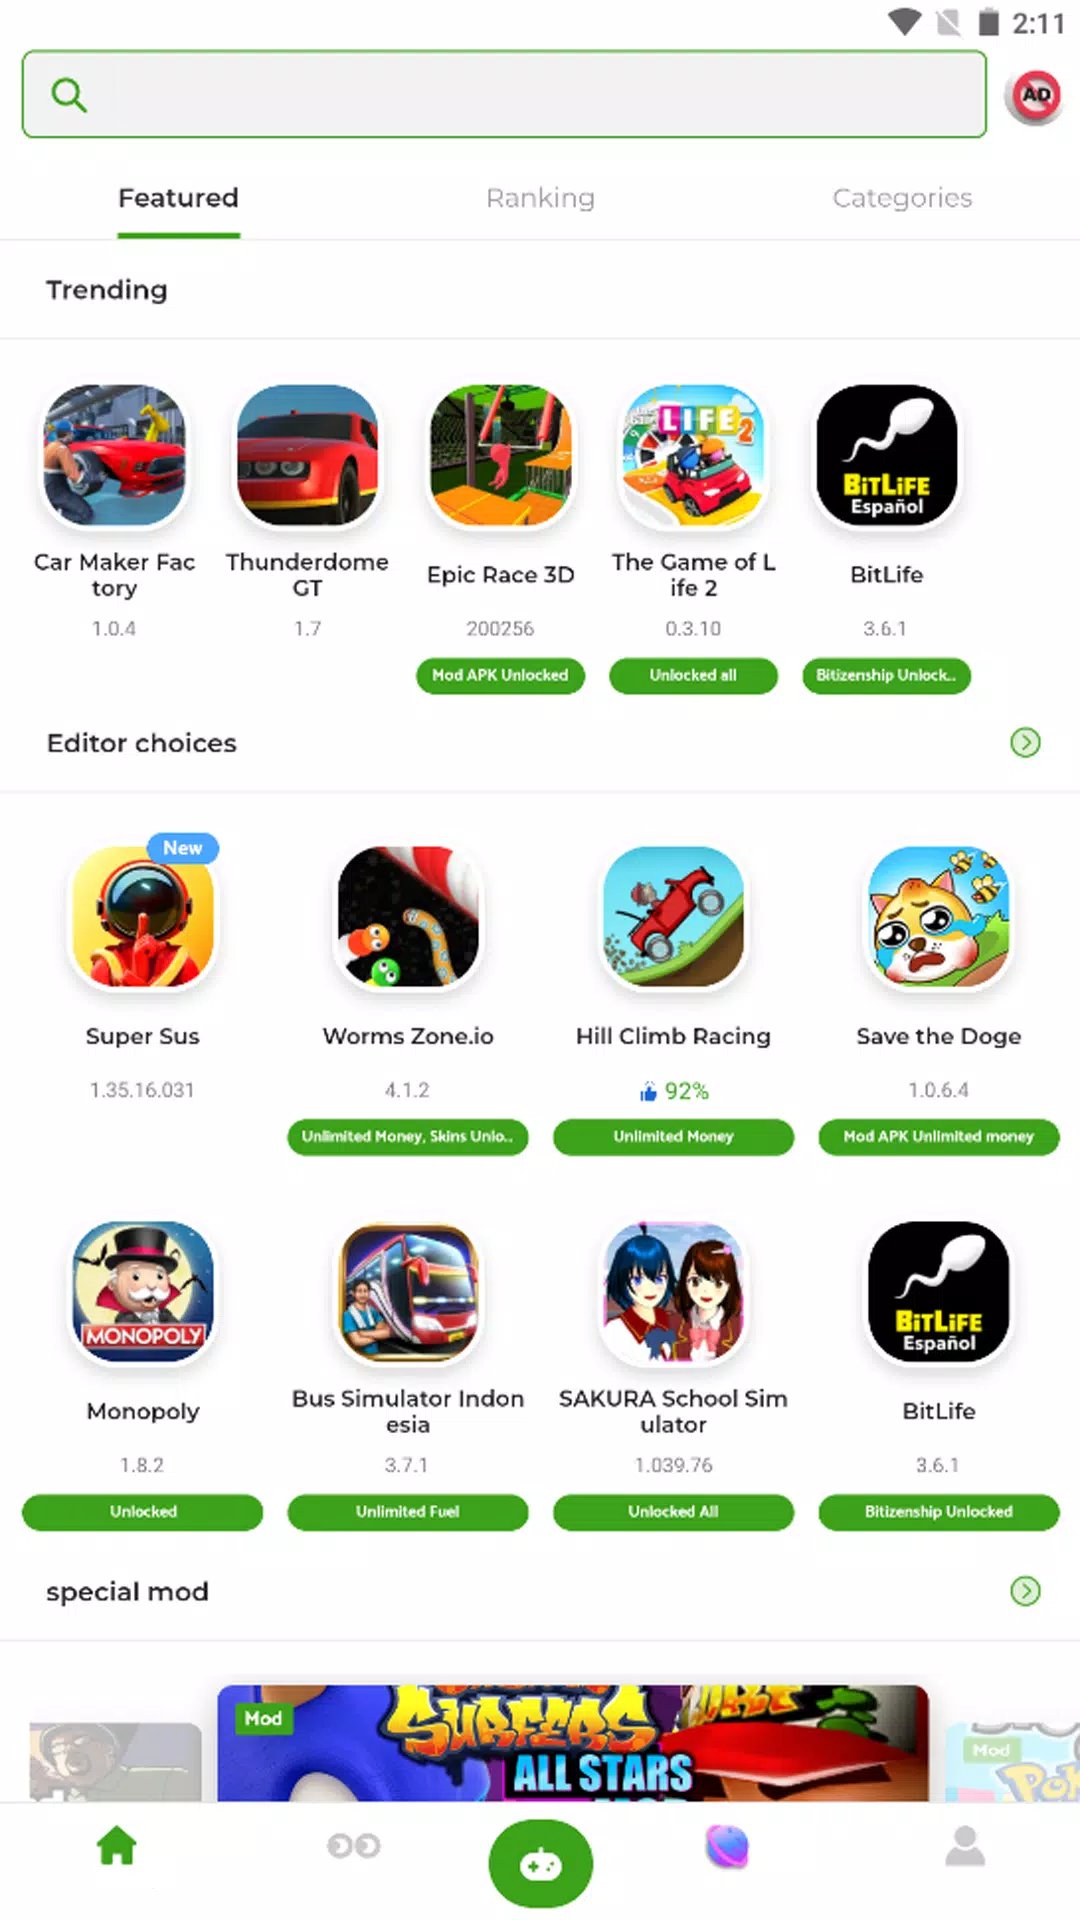 Rexdl: Happy Modding Games - Apps on Google Play